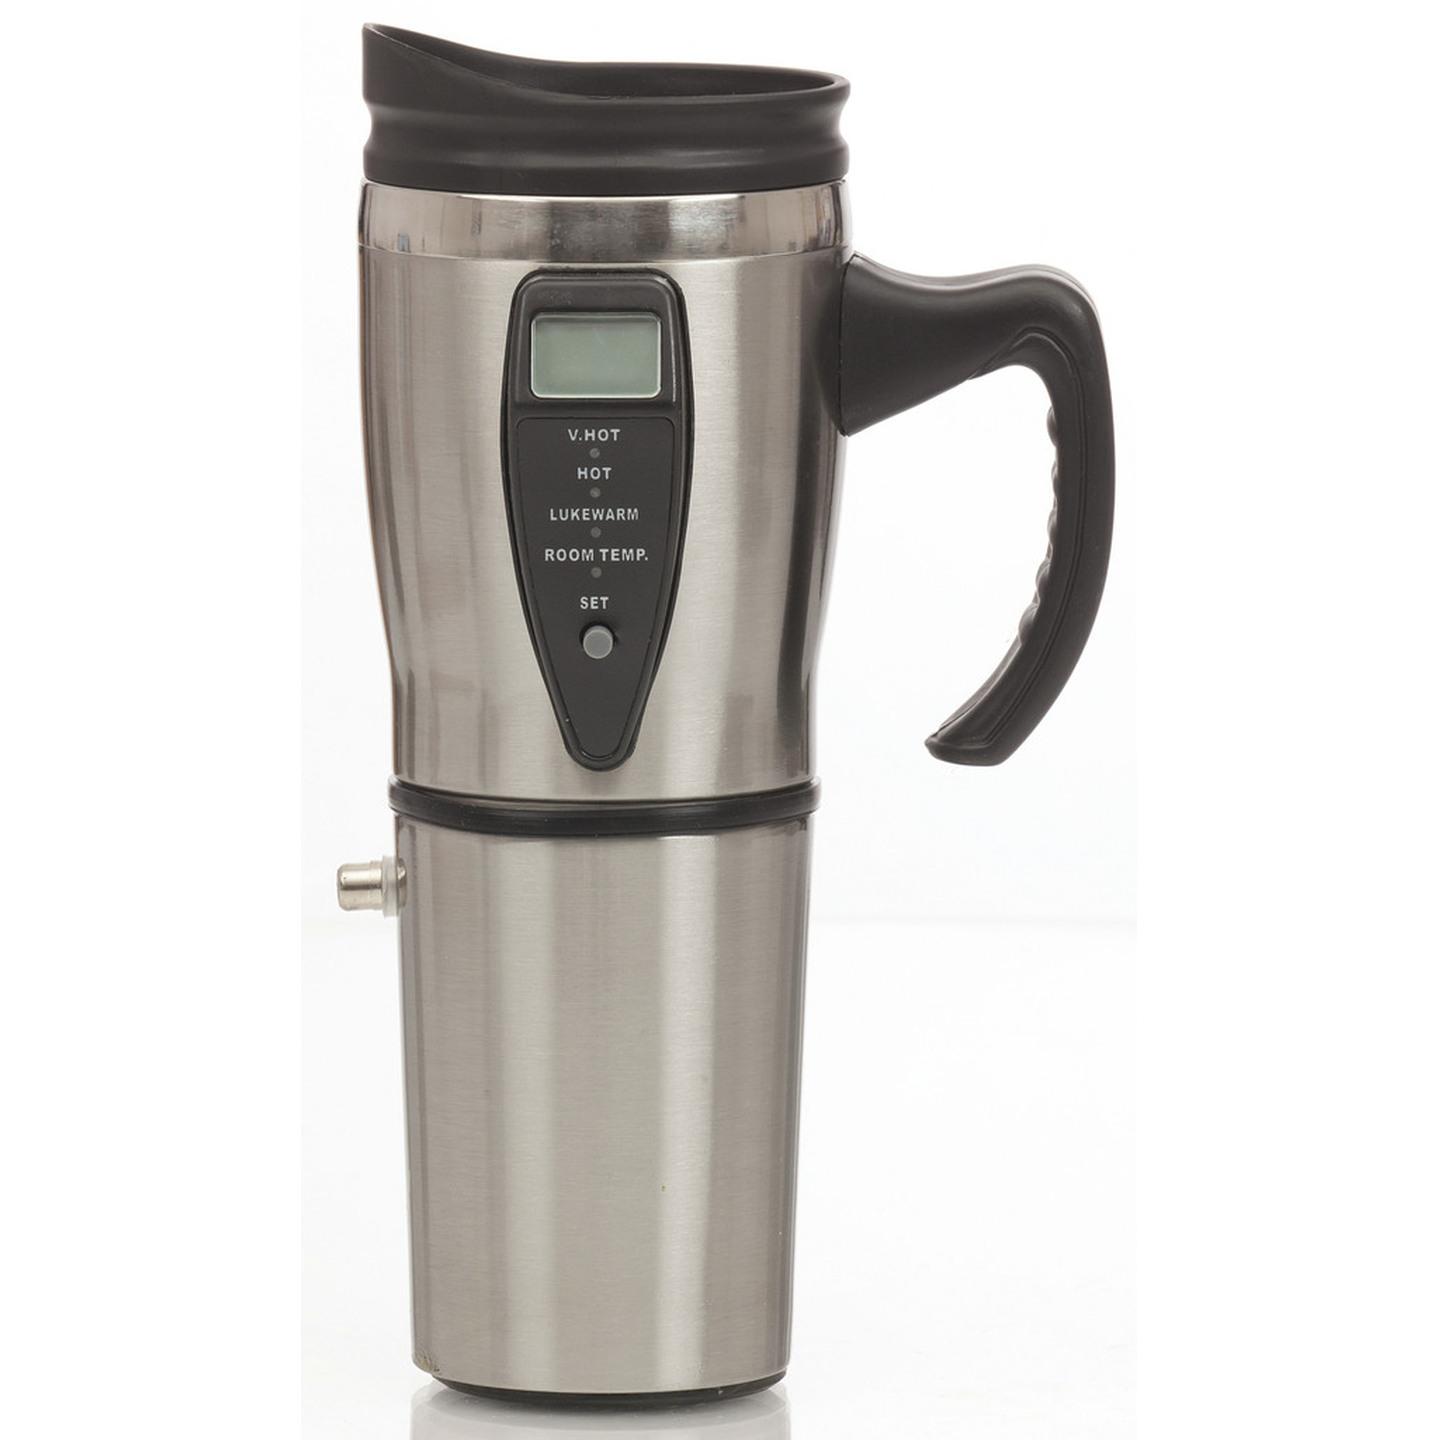 Travel Mug with Built-in Heater